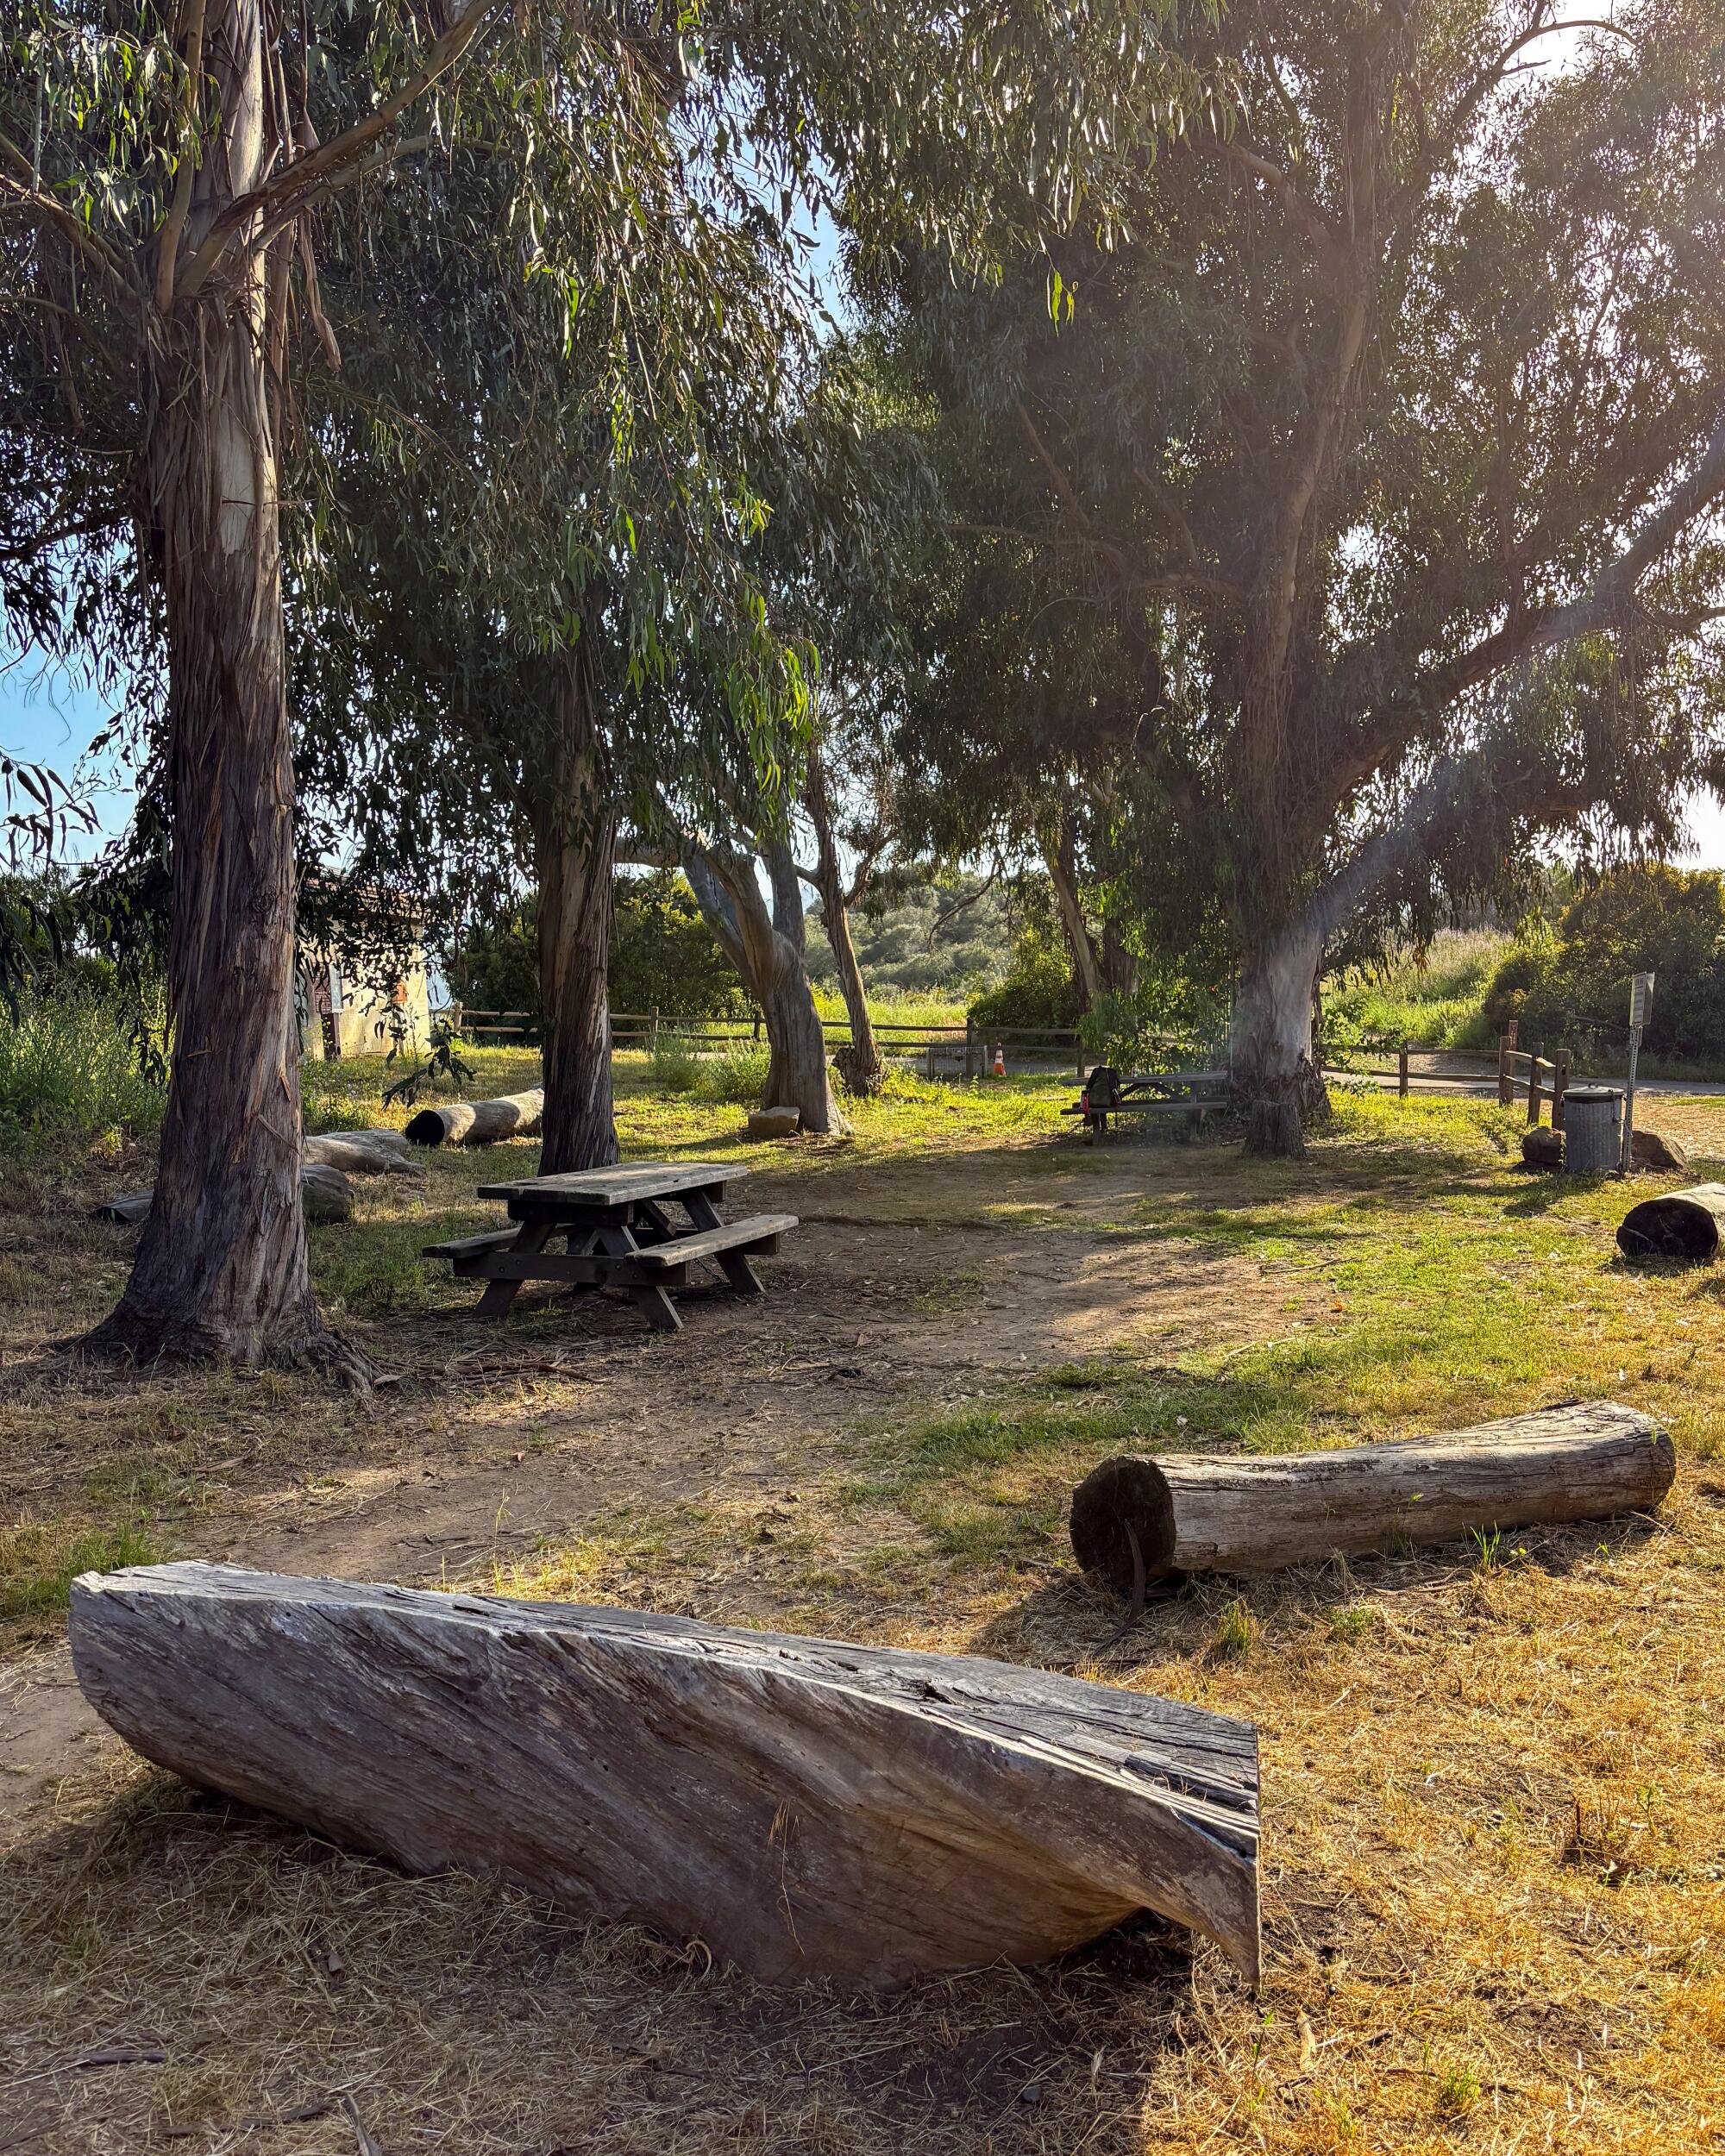 A primitive campground with picnic tables and logs for seats